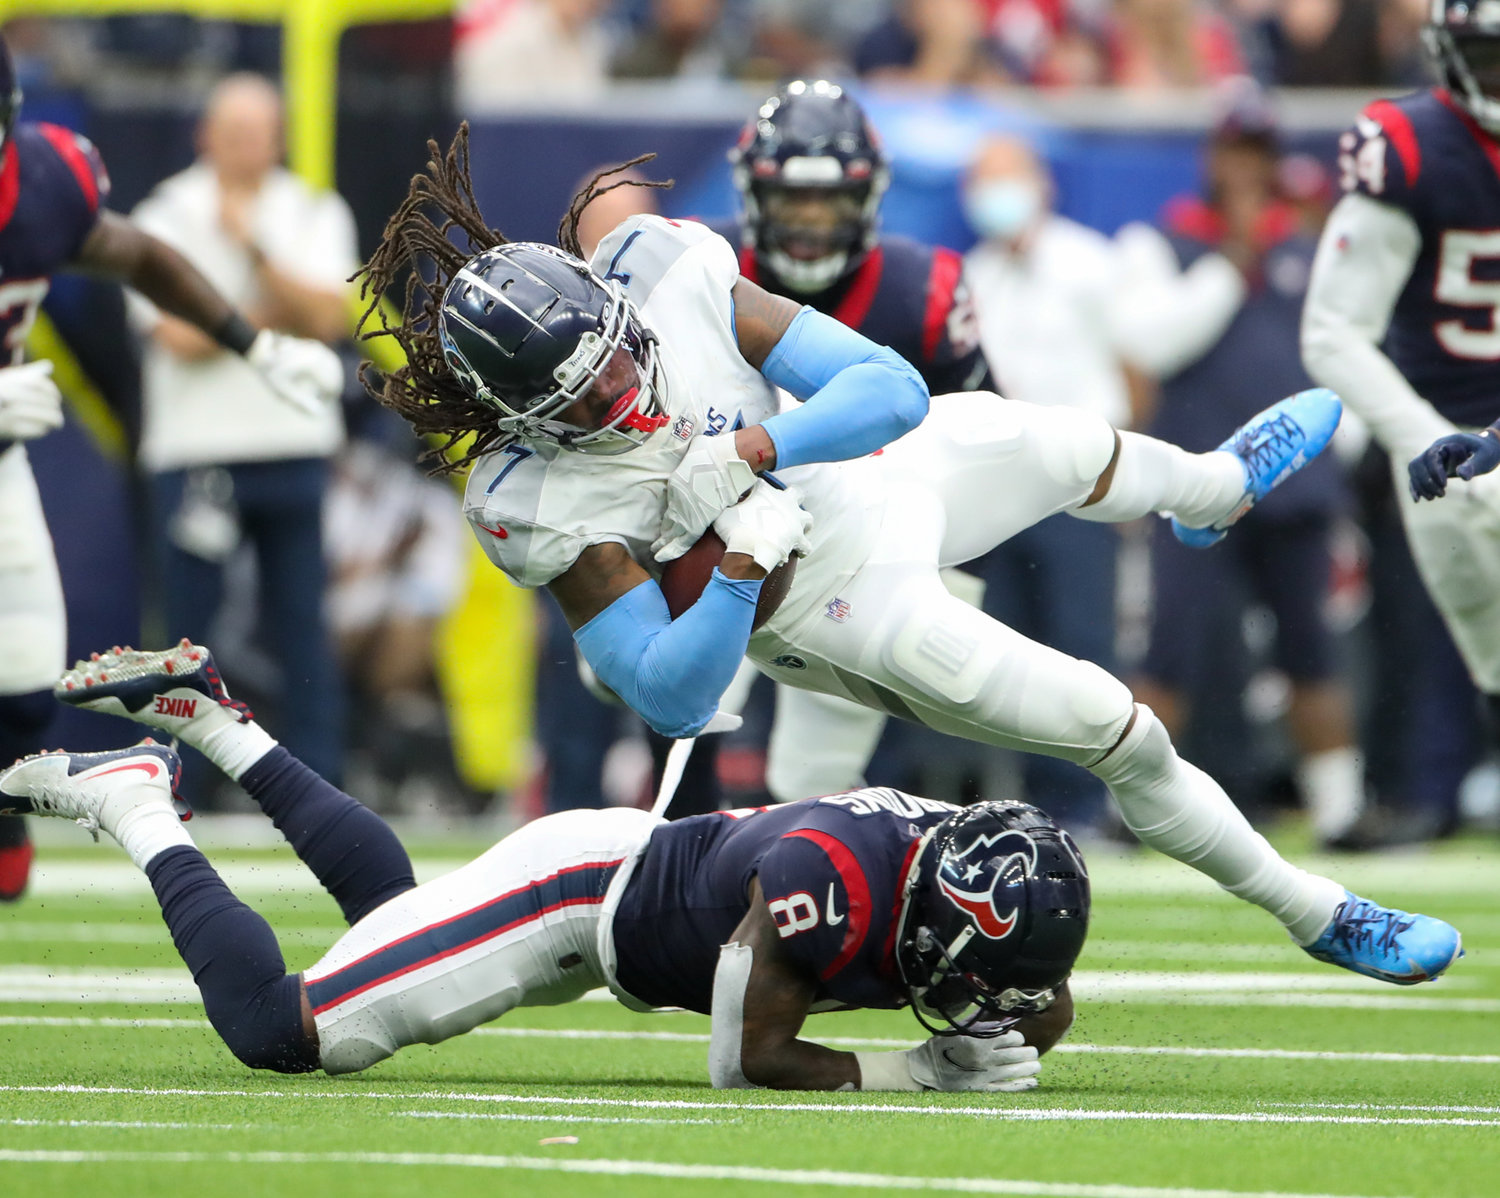 Tennessee Titans running back D'Onta Foreman (7) is tripped up by Houston Texans free safety Terrence Brooks (8) during an NFL game on Jan. 9, 2022 in Houston, Texas.